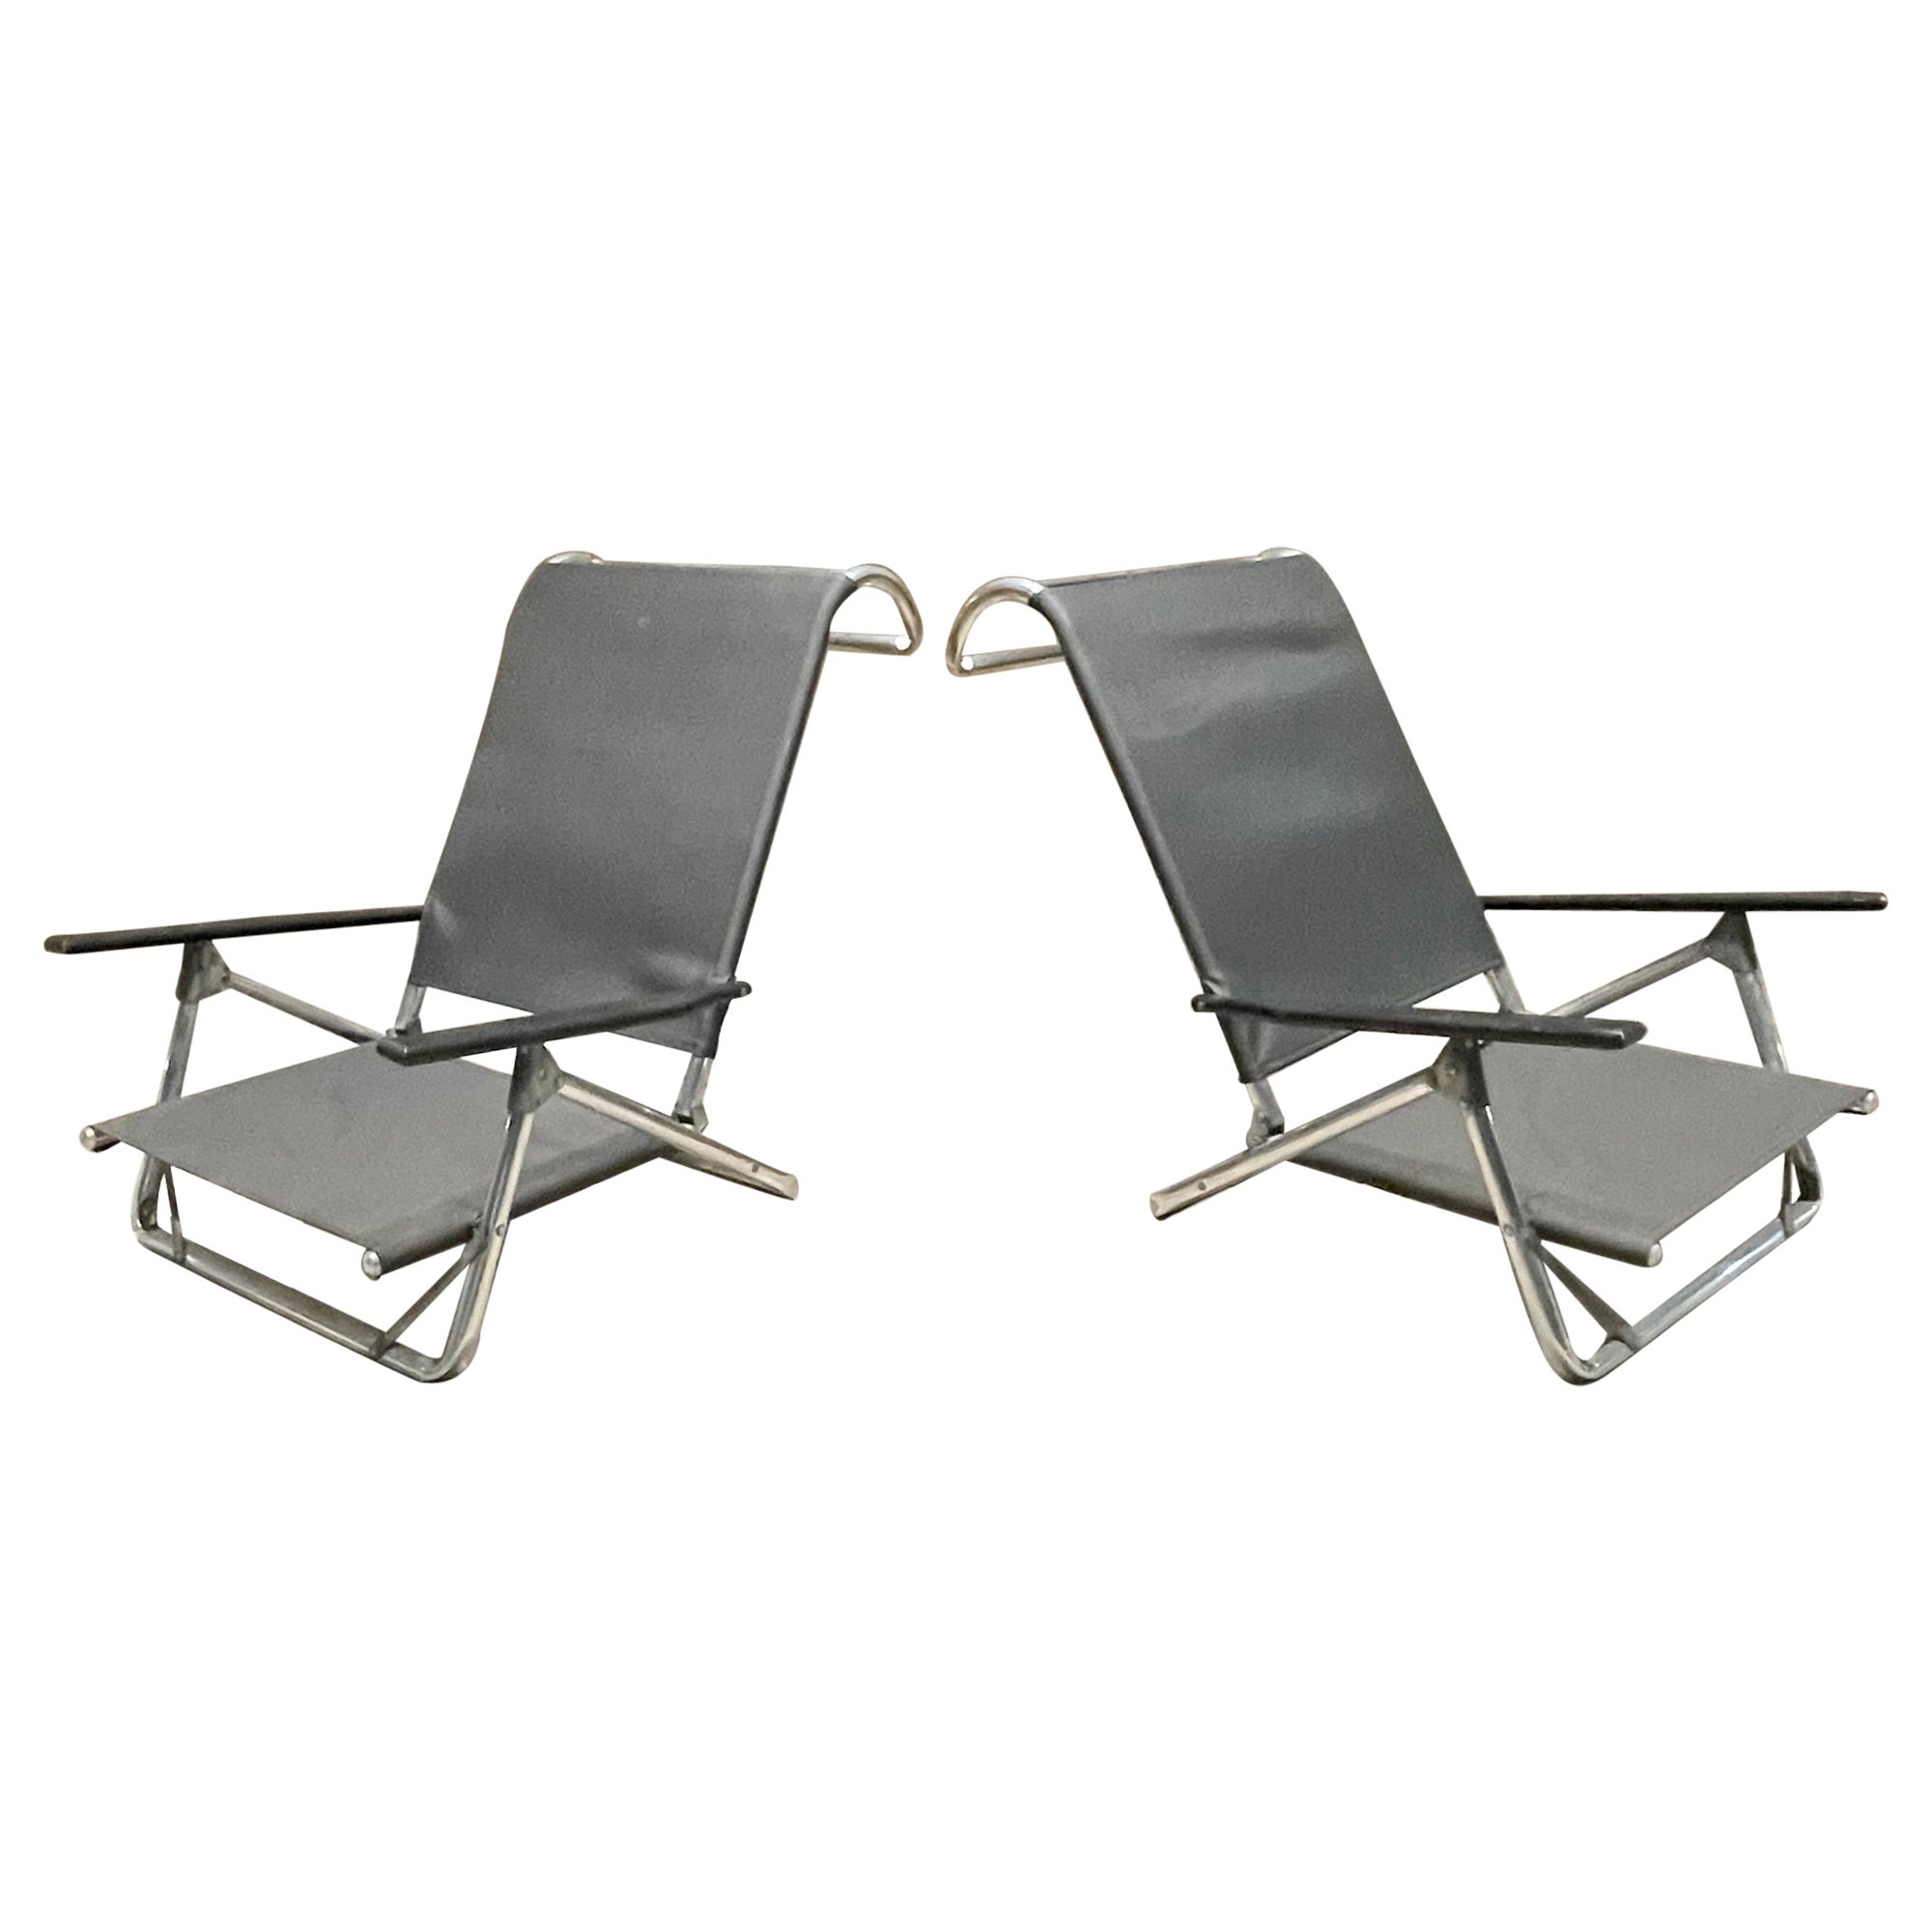 Eye catching modern by TELESCOPE of Granville New York, pair of modern beach patio folding chairs aluminum with wood arm handles.
Ideal for Beach Patio Pool Boat Outdoor Lawn Sun Picnic Parties! Be in style.
Seat height angle can be adjusted as